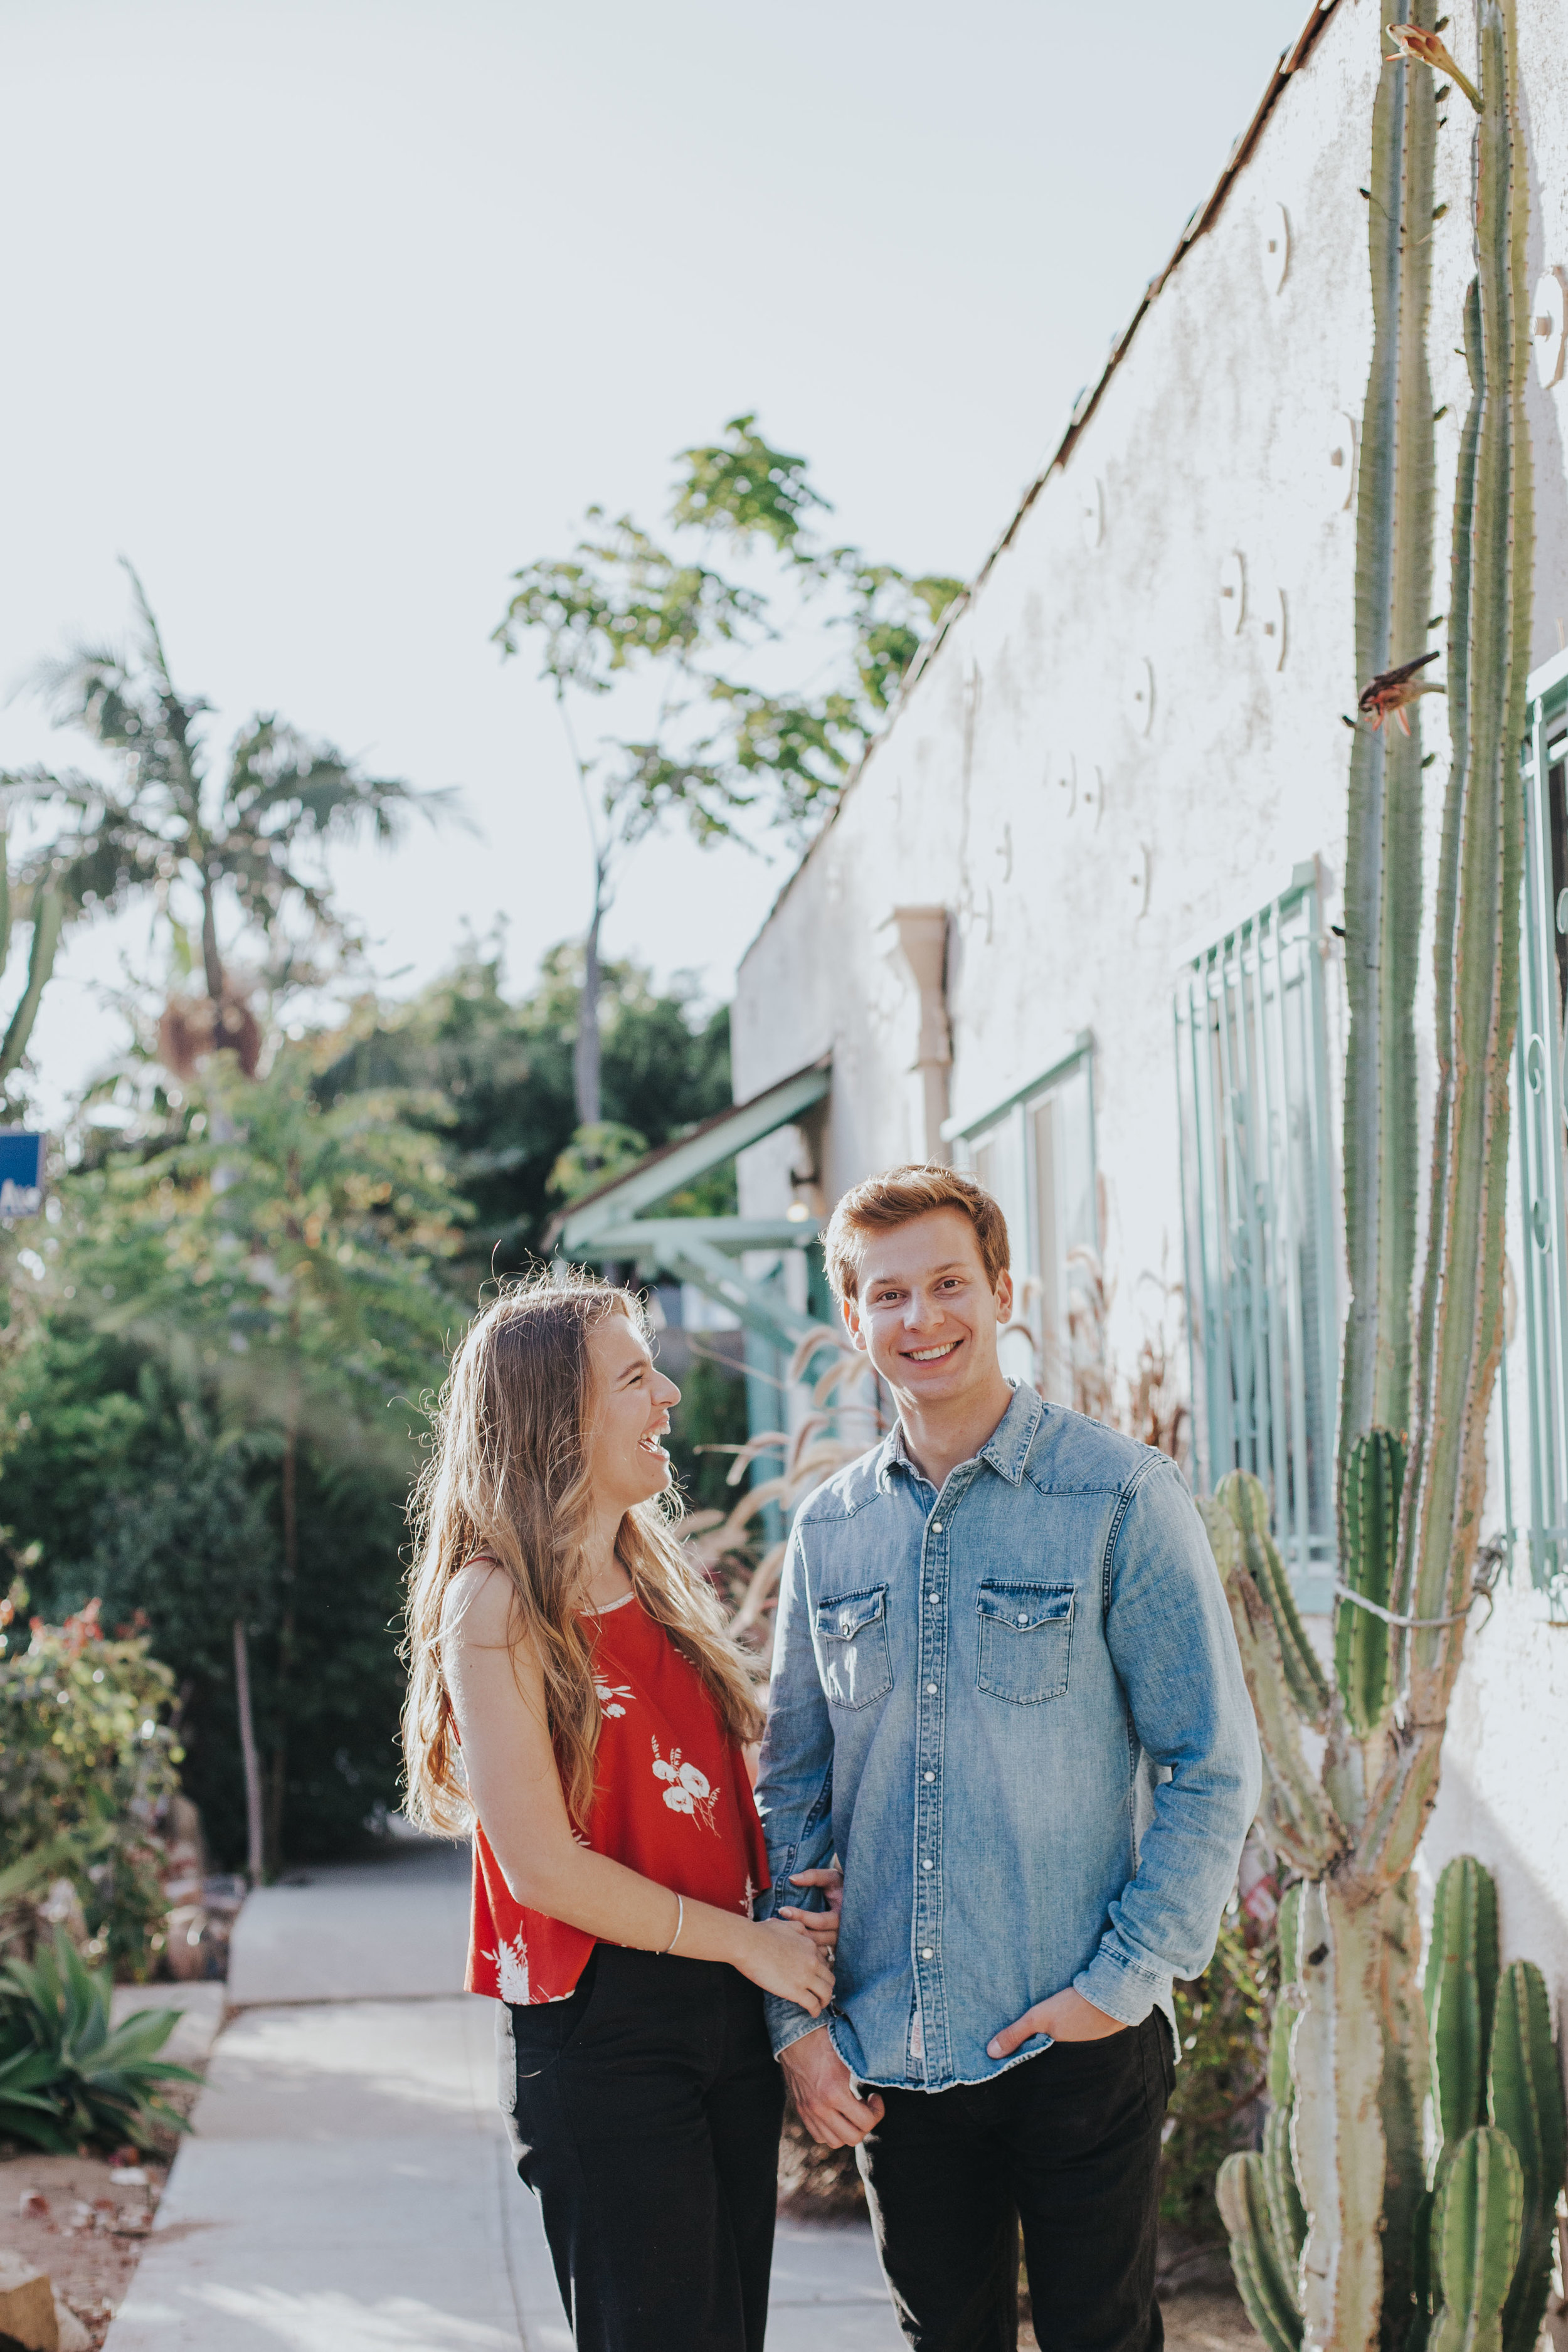   All photos in this post are by  Dustin Stafford  who you should definitely hire for engagement or wedding pics! He's wonderful!  